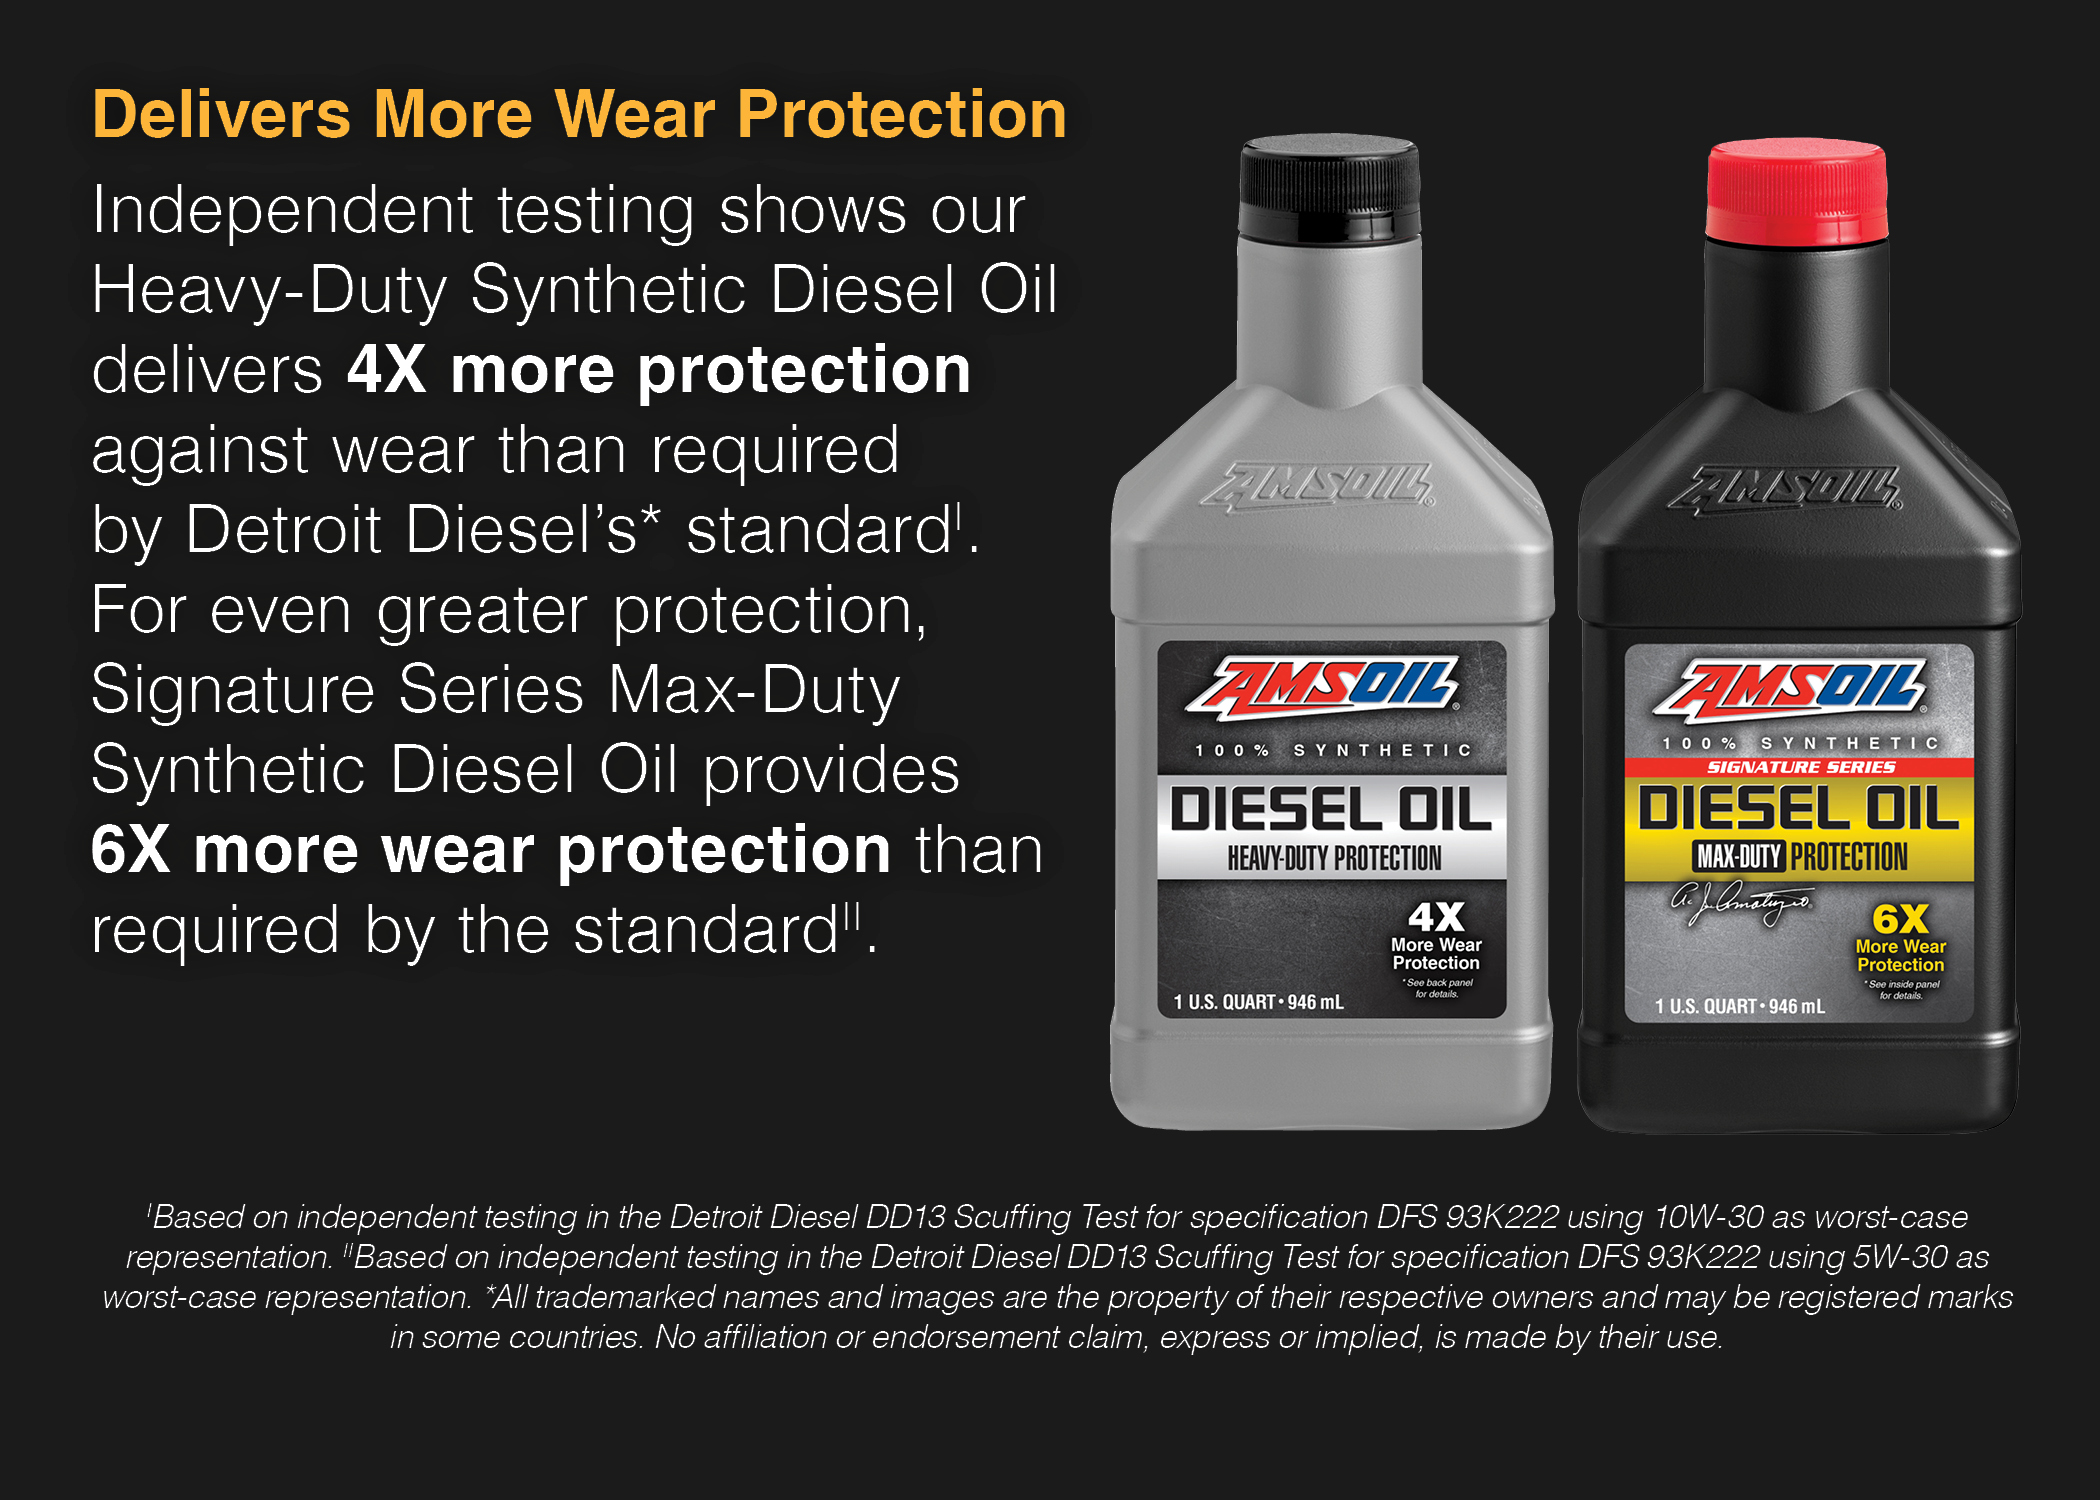 More Protection to your Diesel Engine using AMSOIL Diesel oils.